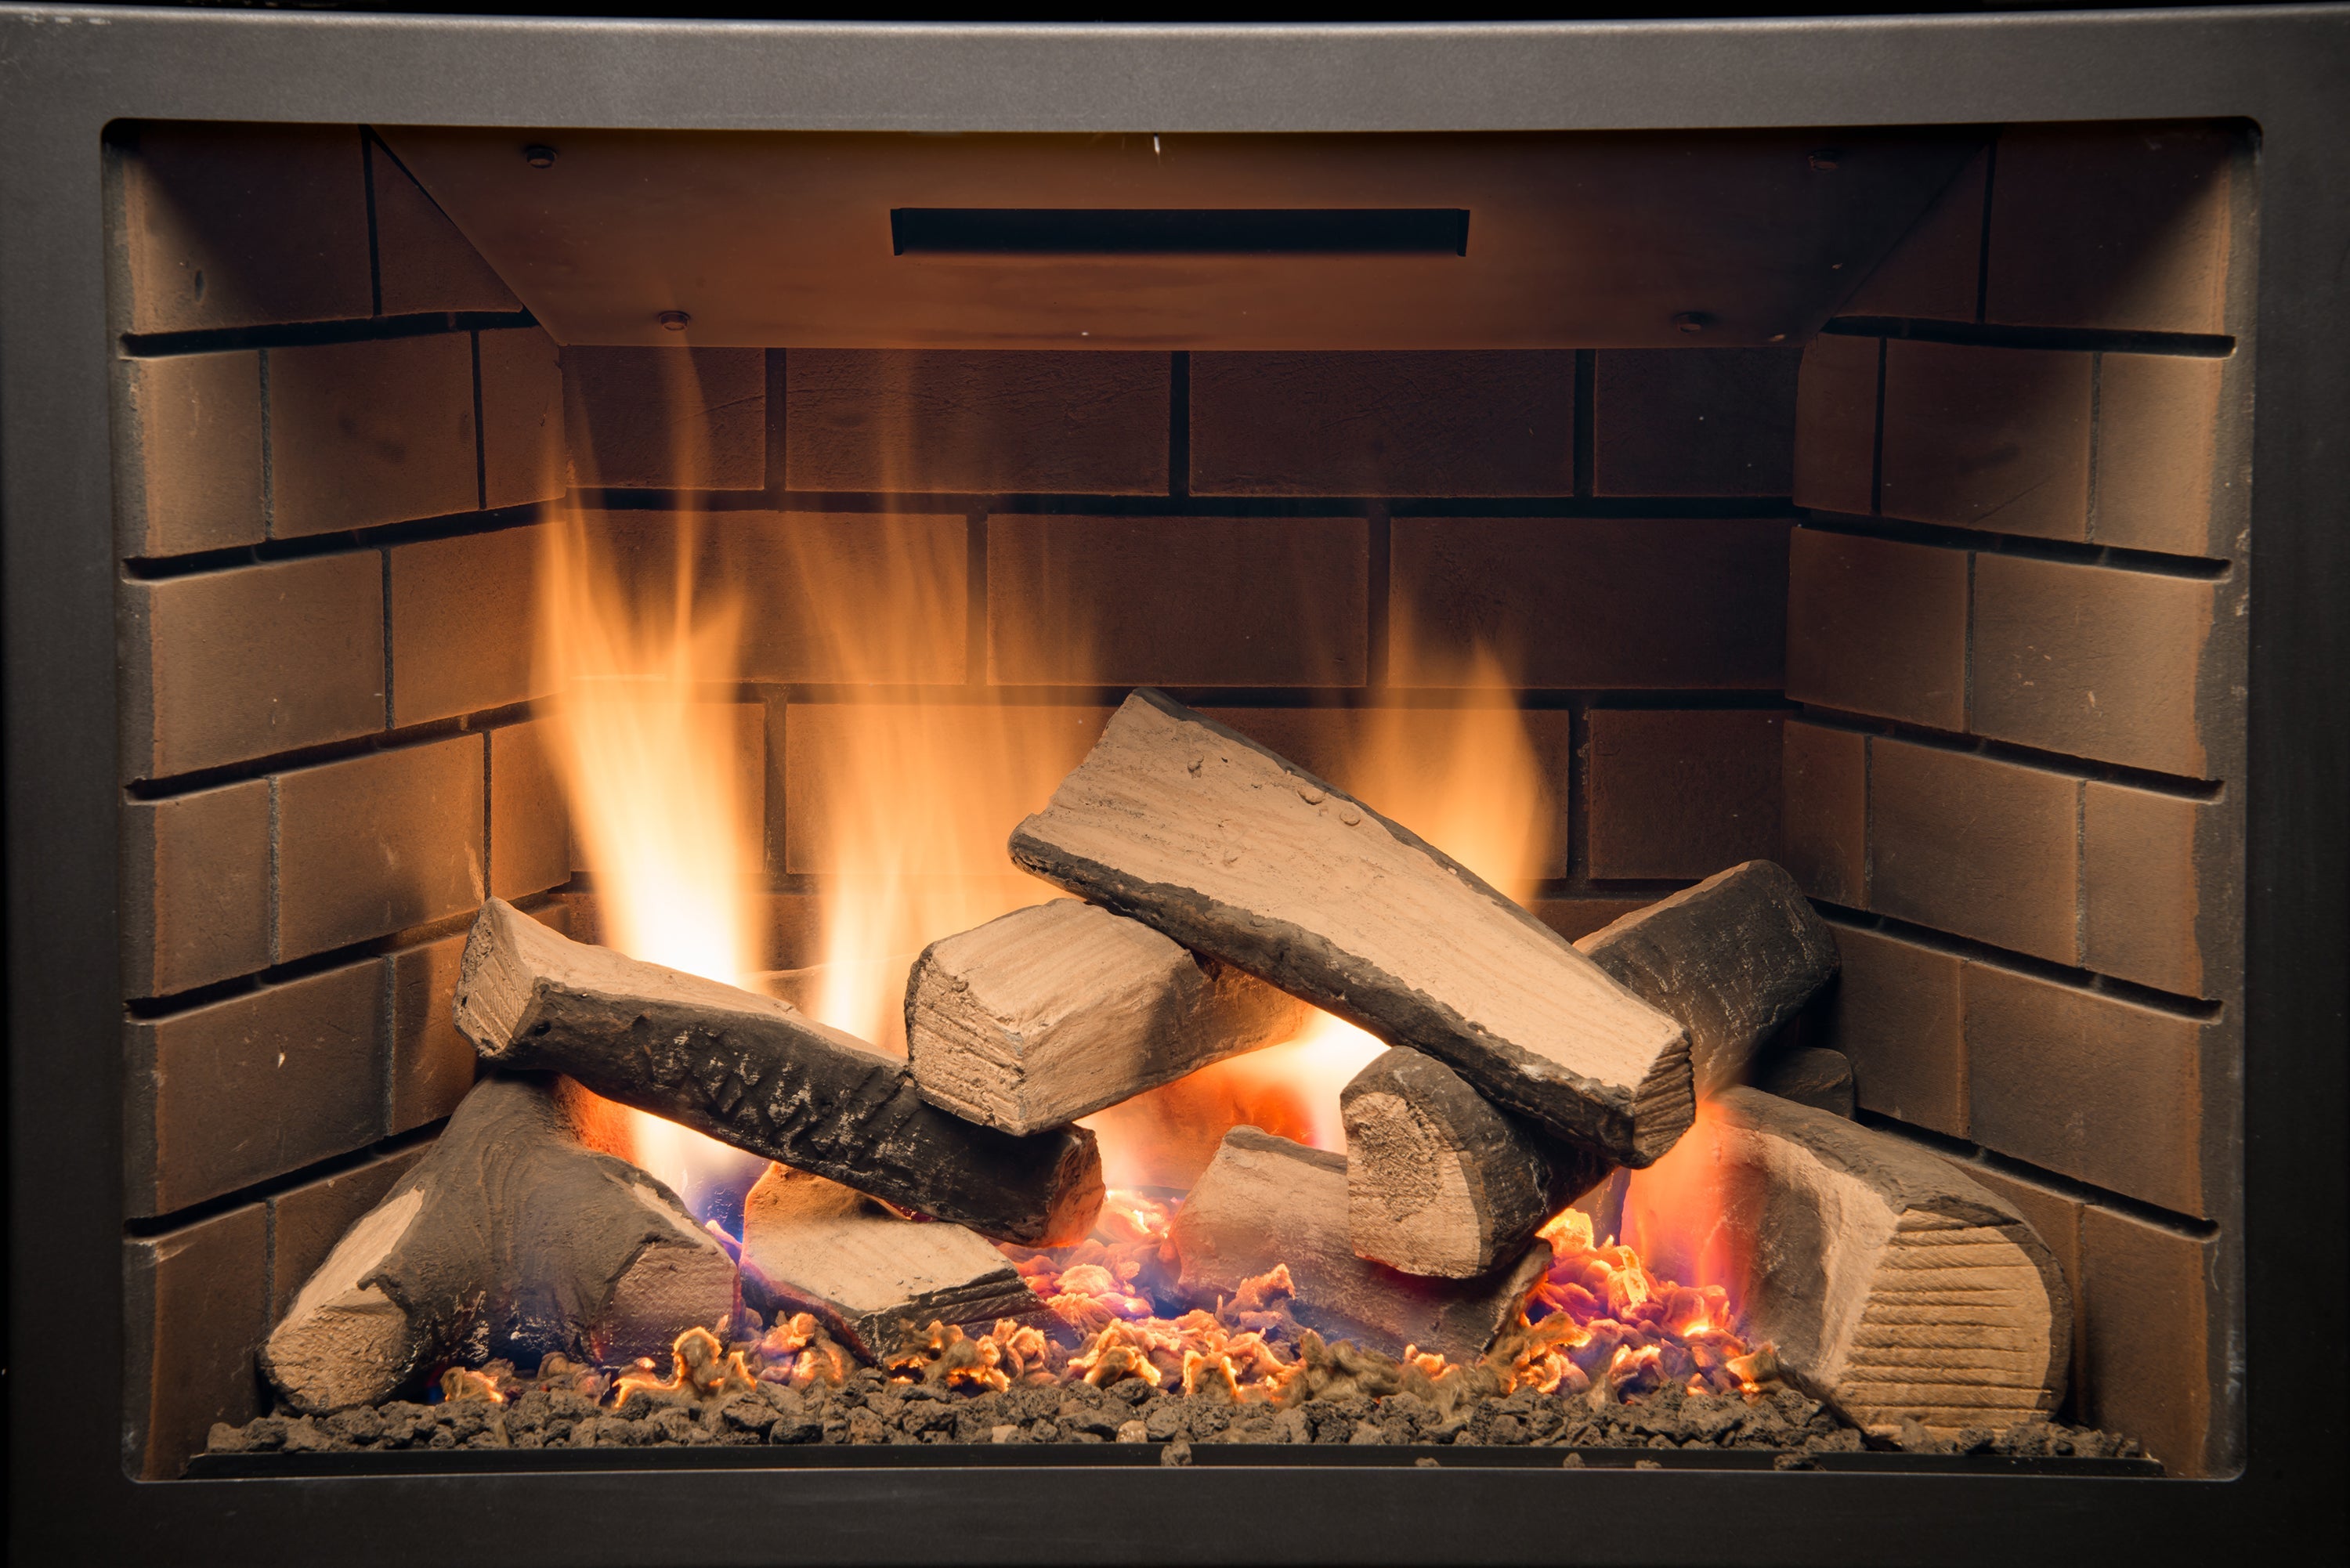 Sierra Flame - Abbott 30" Deluxe Gas Direct Vent Insert Gas Fireplace- Firebox With Brick and Logs